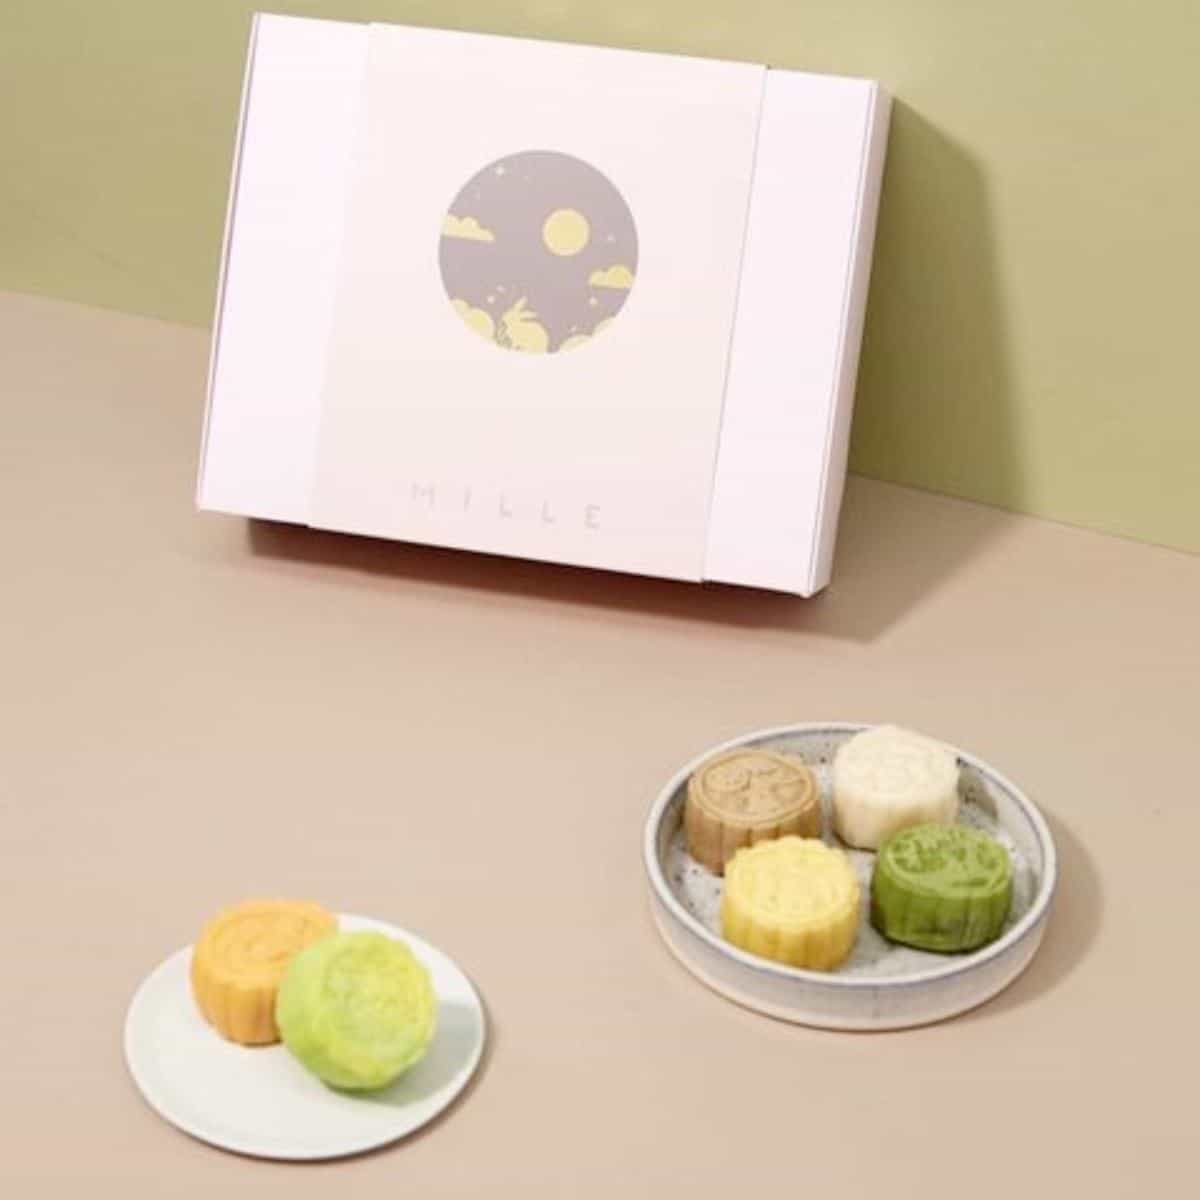 Snowskin Mooncakes in London available for delivery